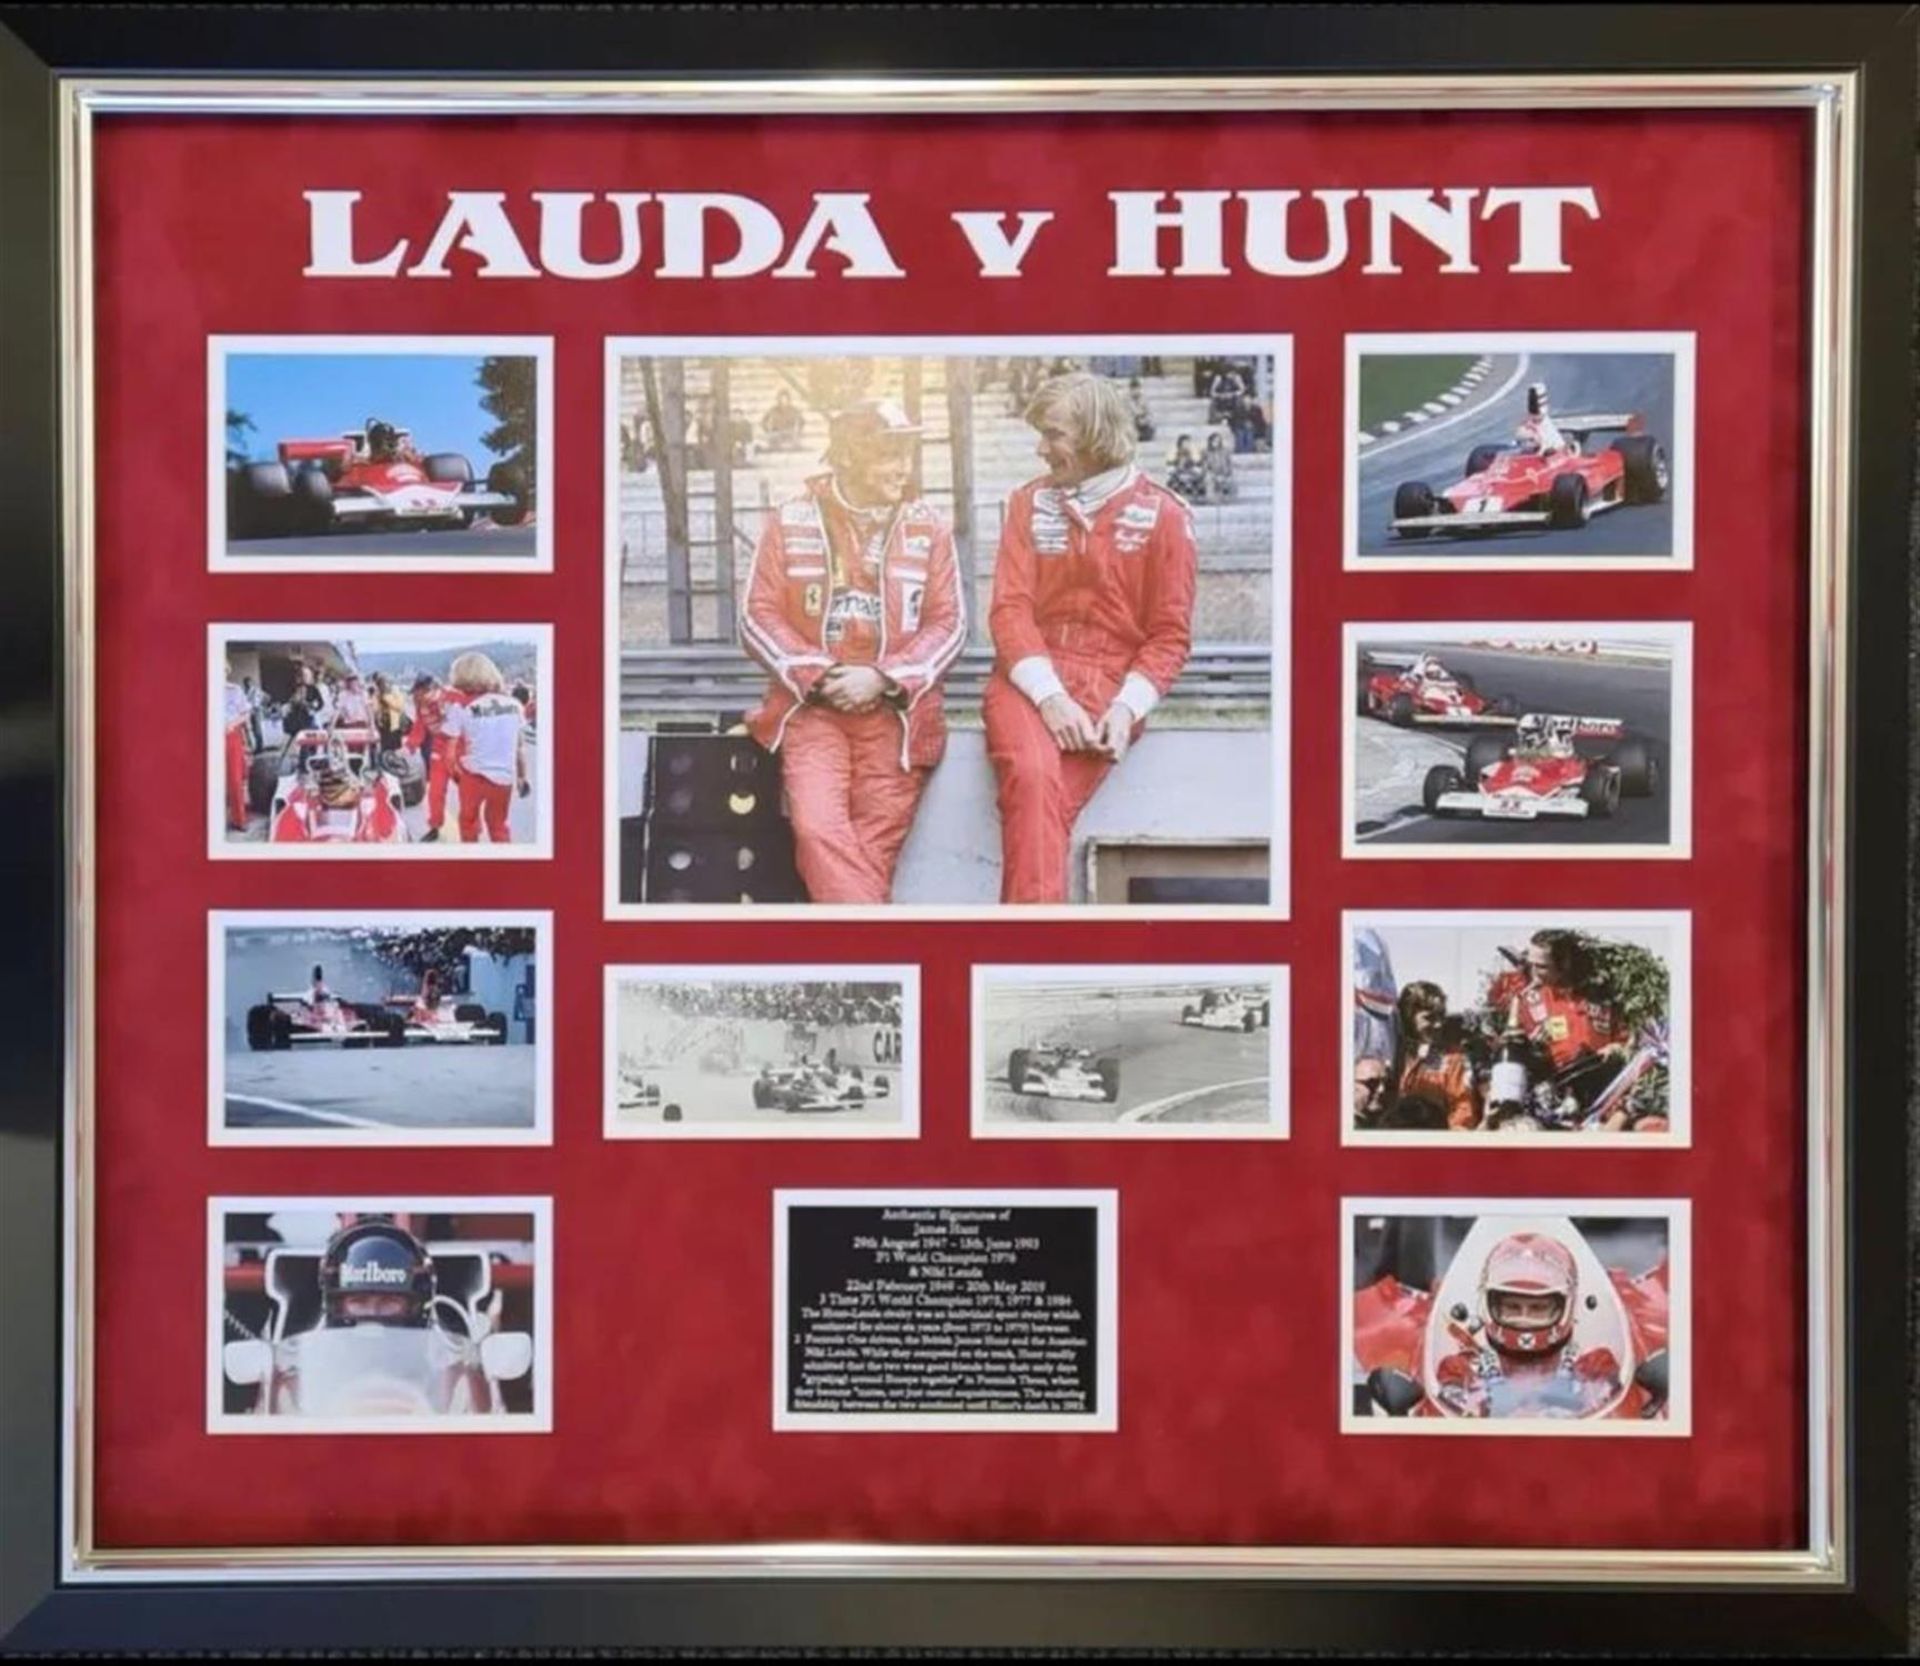 Lauda v Hunt Framed Production with signed B/W images of Both Drivers - Image 5 of 5